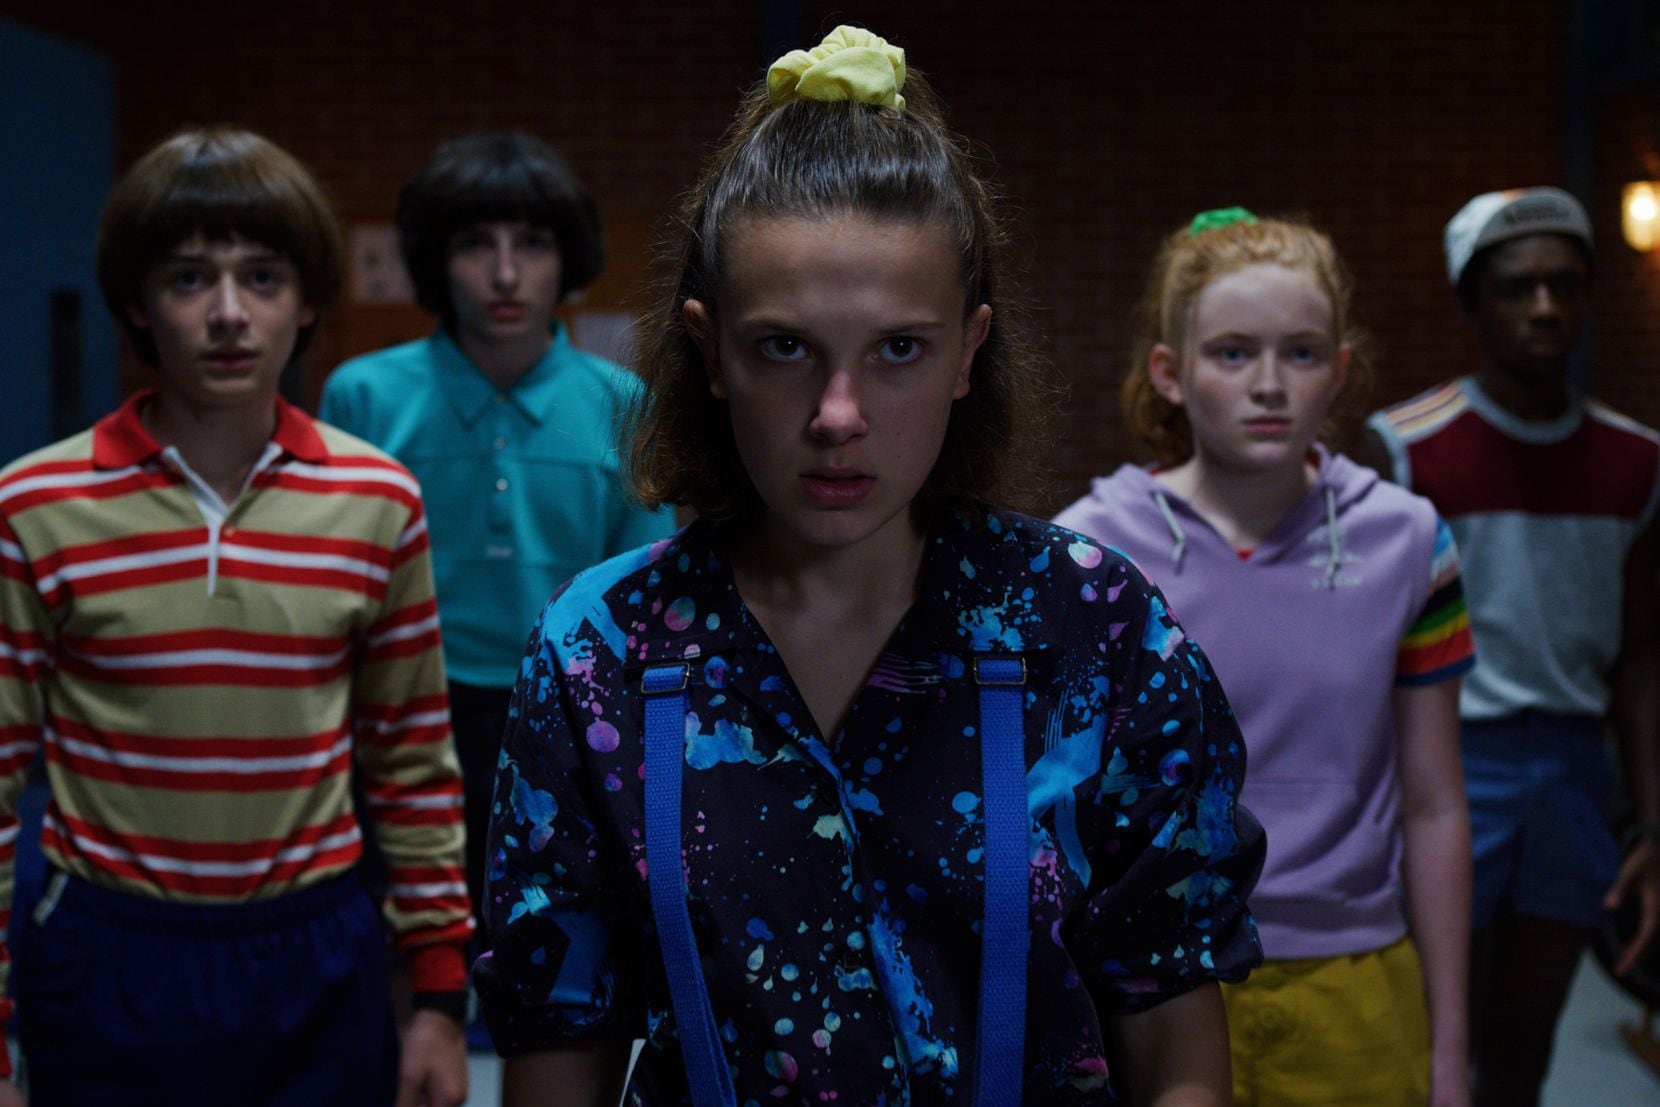 Stranger Things' star reveals whether Barb is actually dead or not